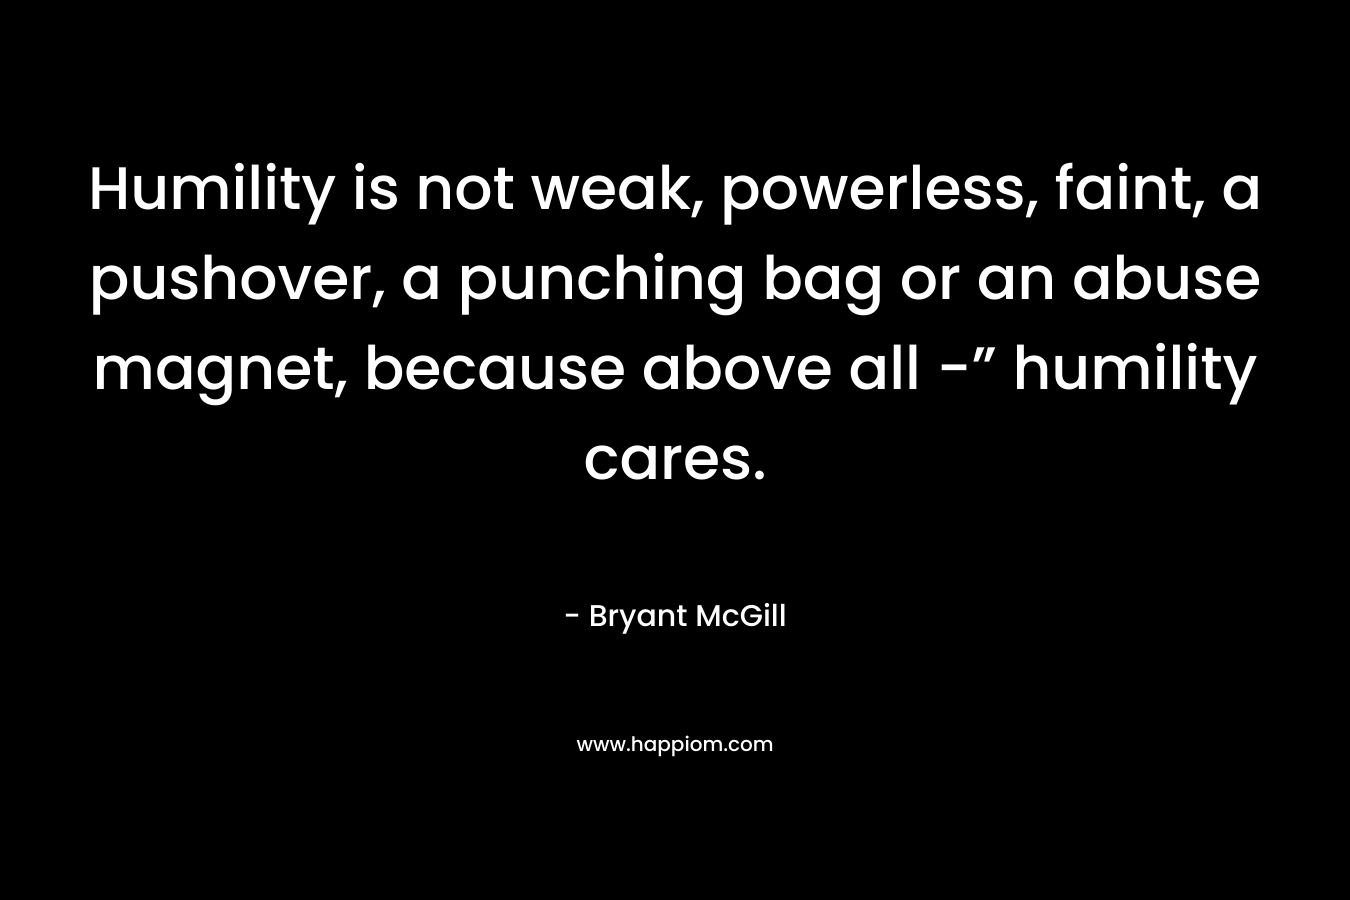 Humility is not weak, powerless, faint, a pushover, a punching bag or an abuse magnet, because above all -” humility cares.